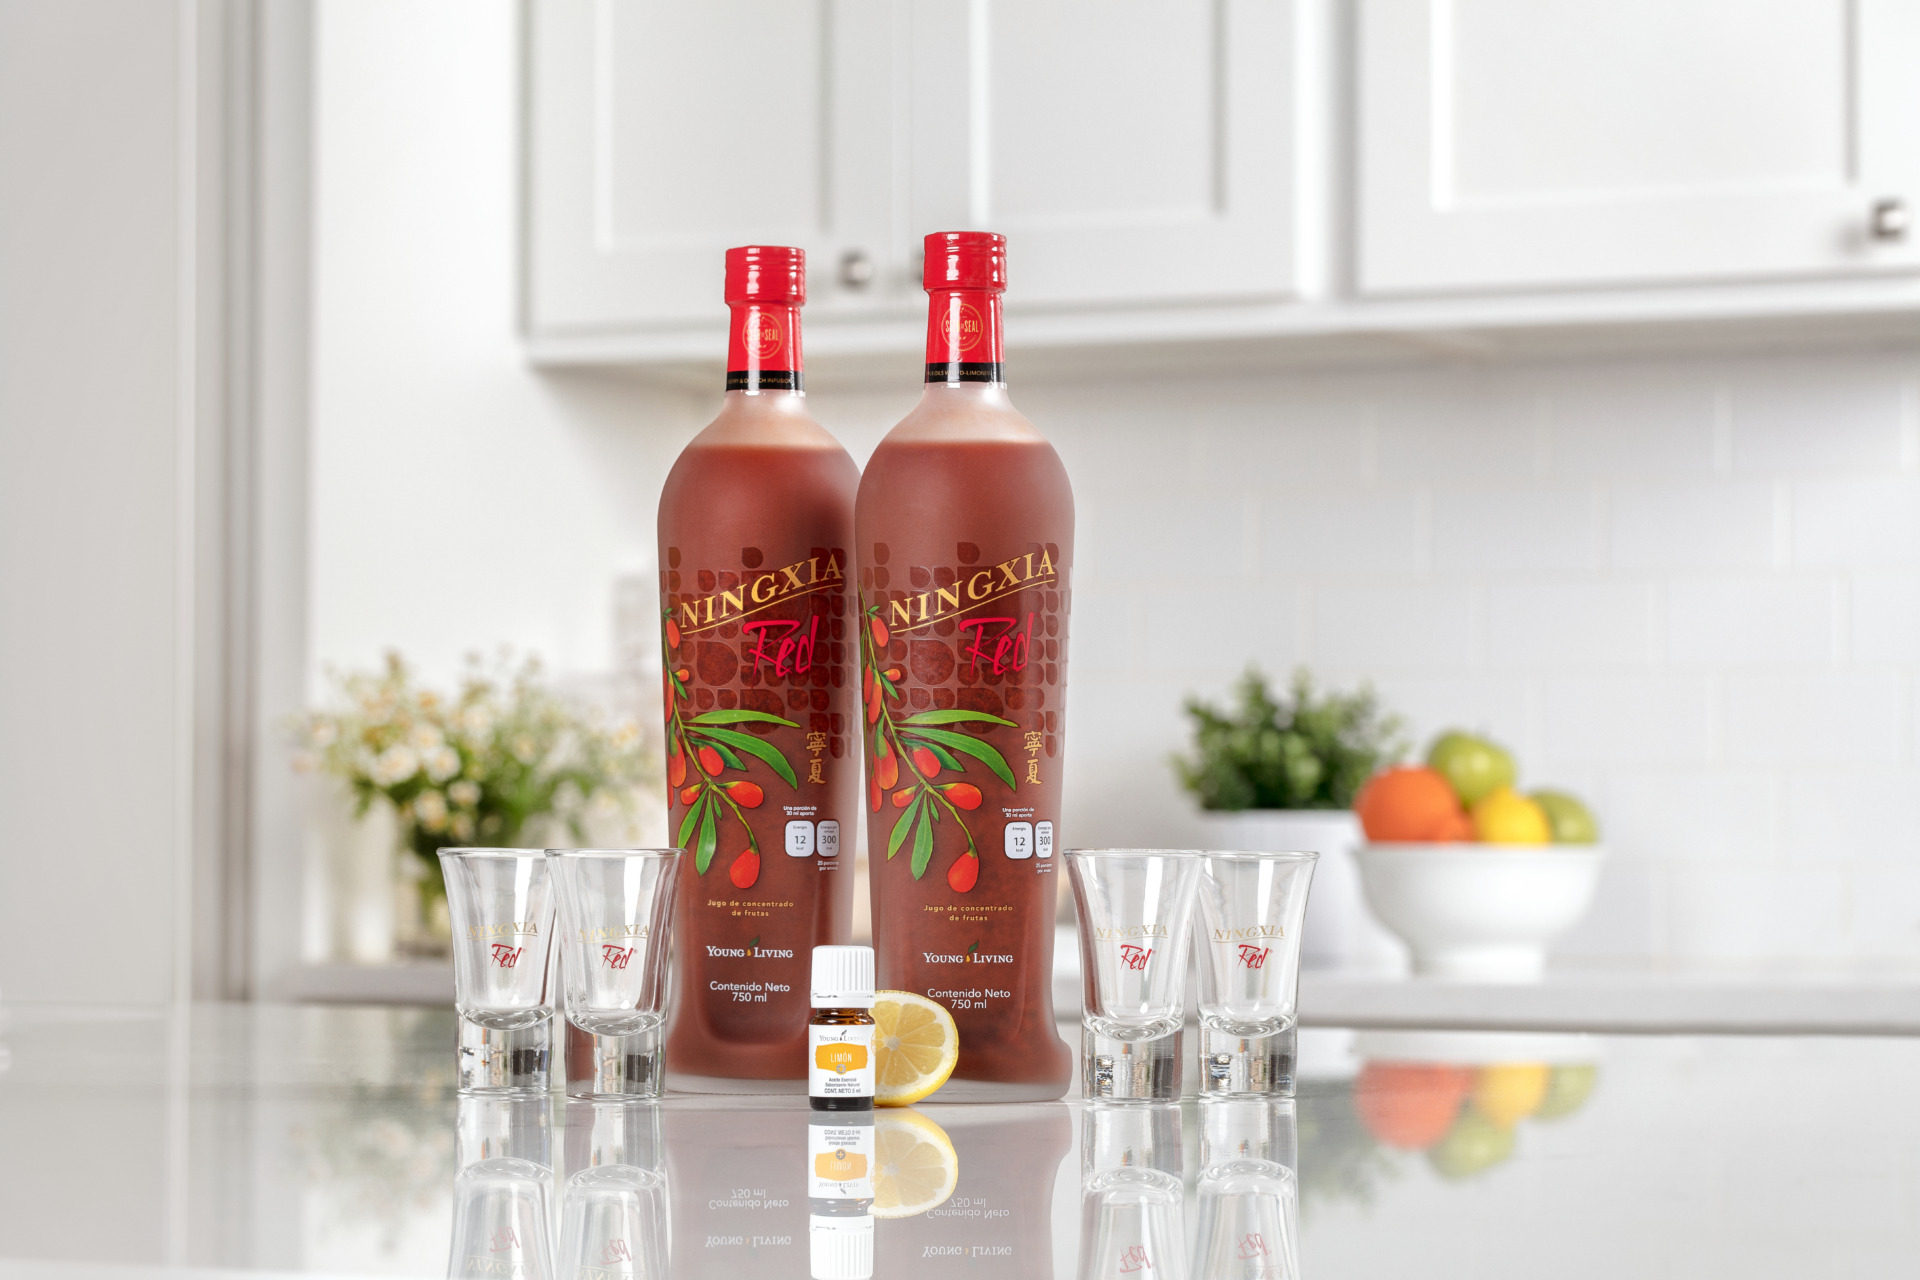 Ningxia red with shot glasses